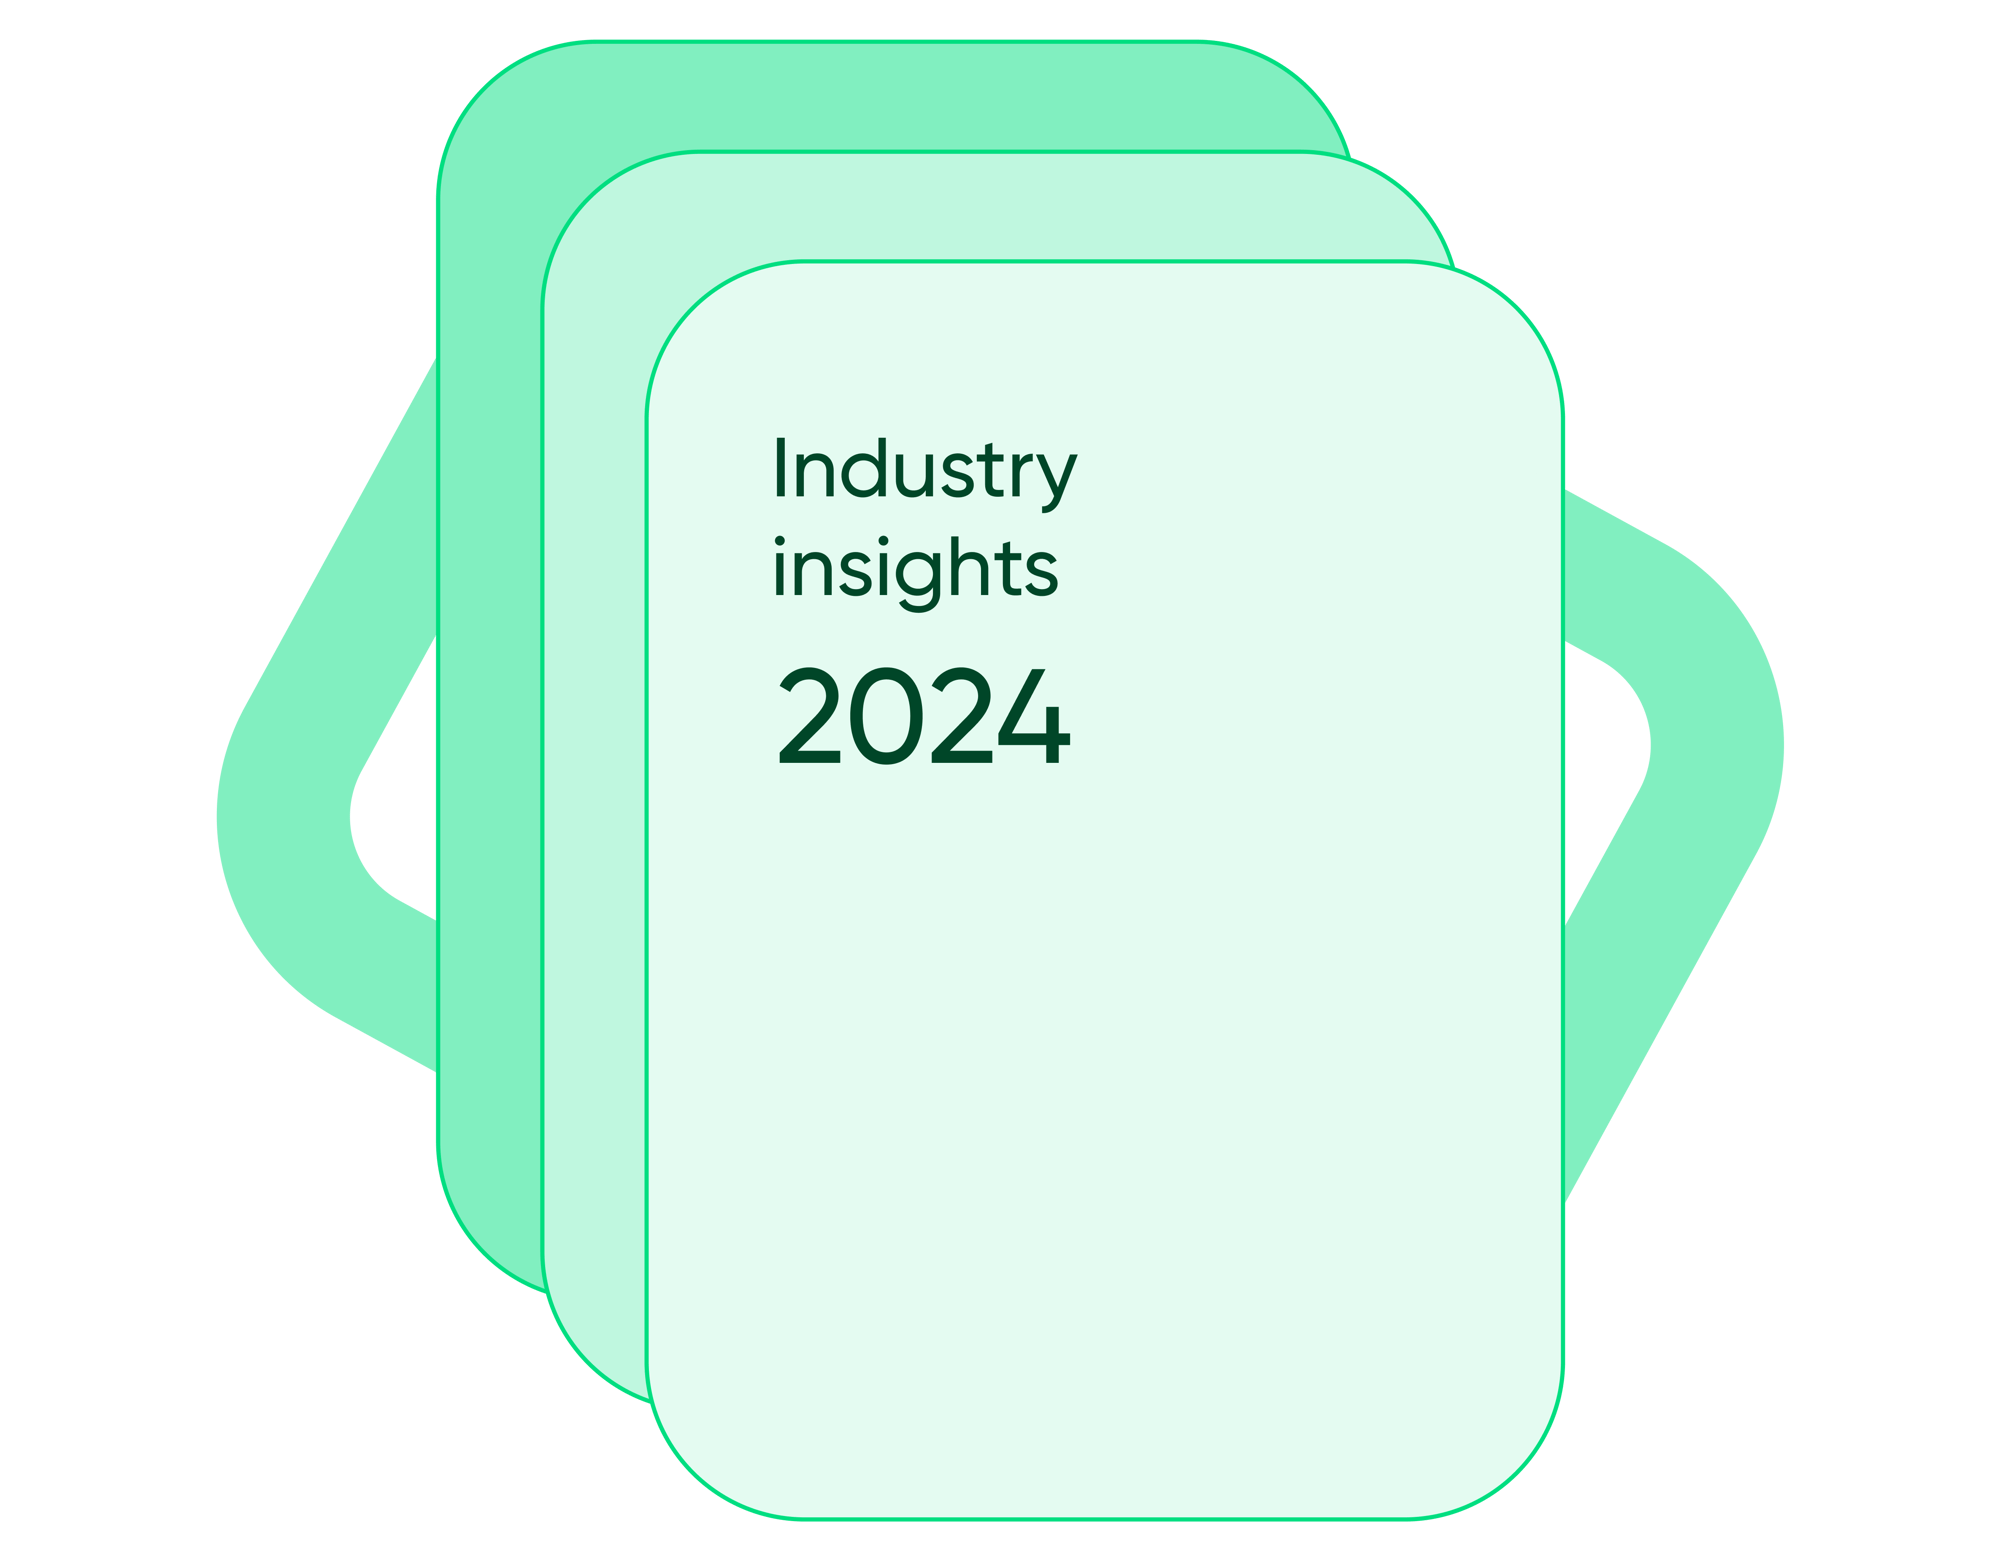 Industry insights 2024